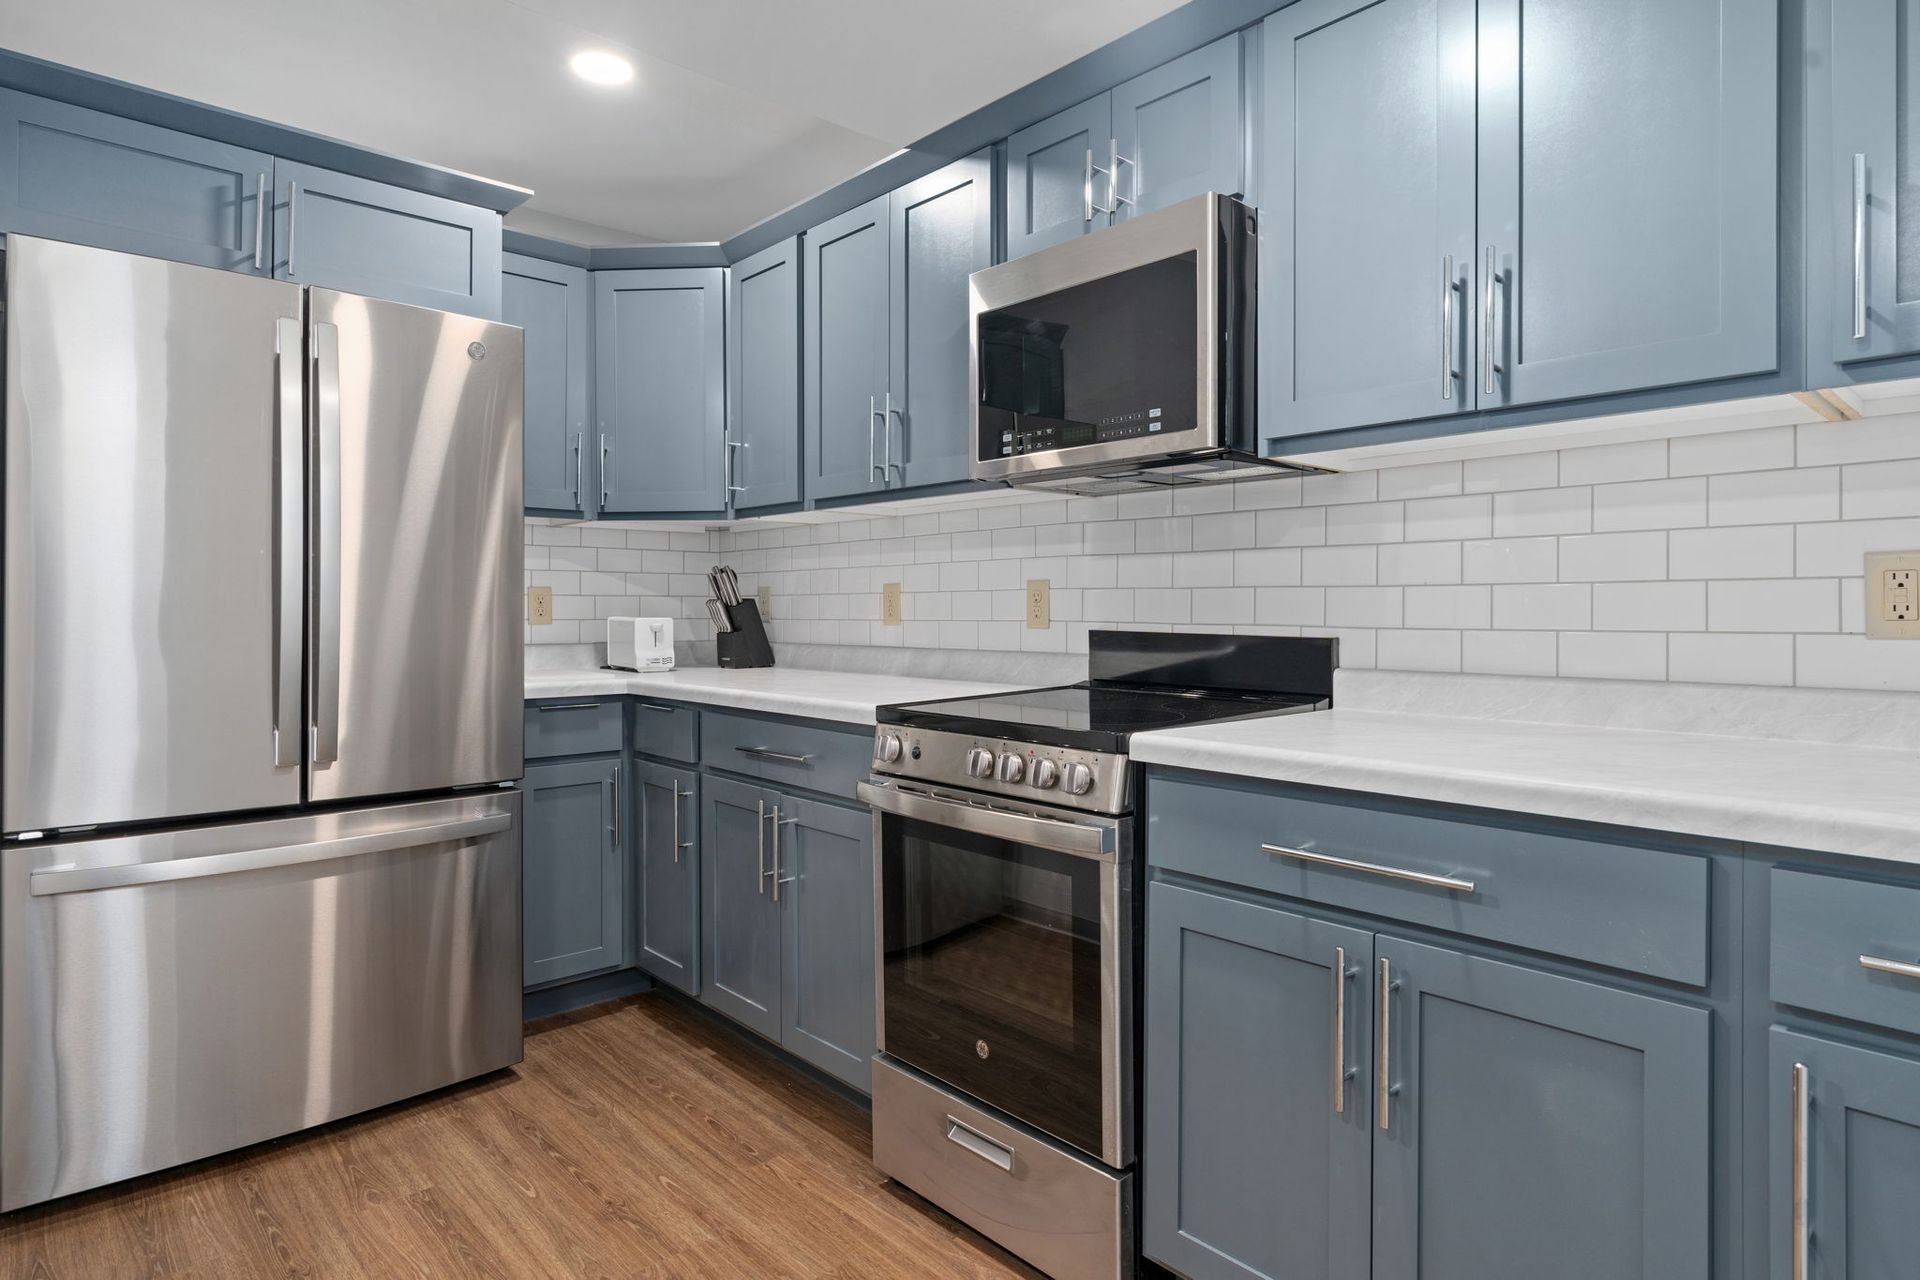 A kitchen with blue cabinets and stainless steel appliances.